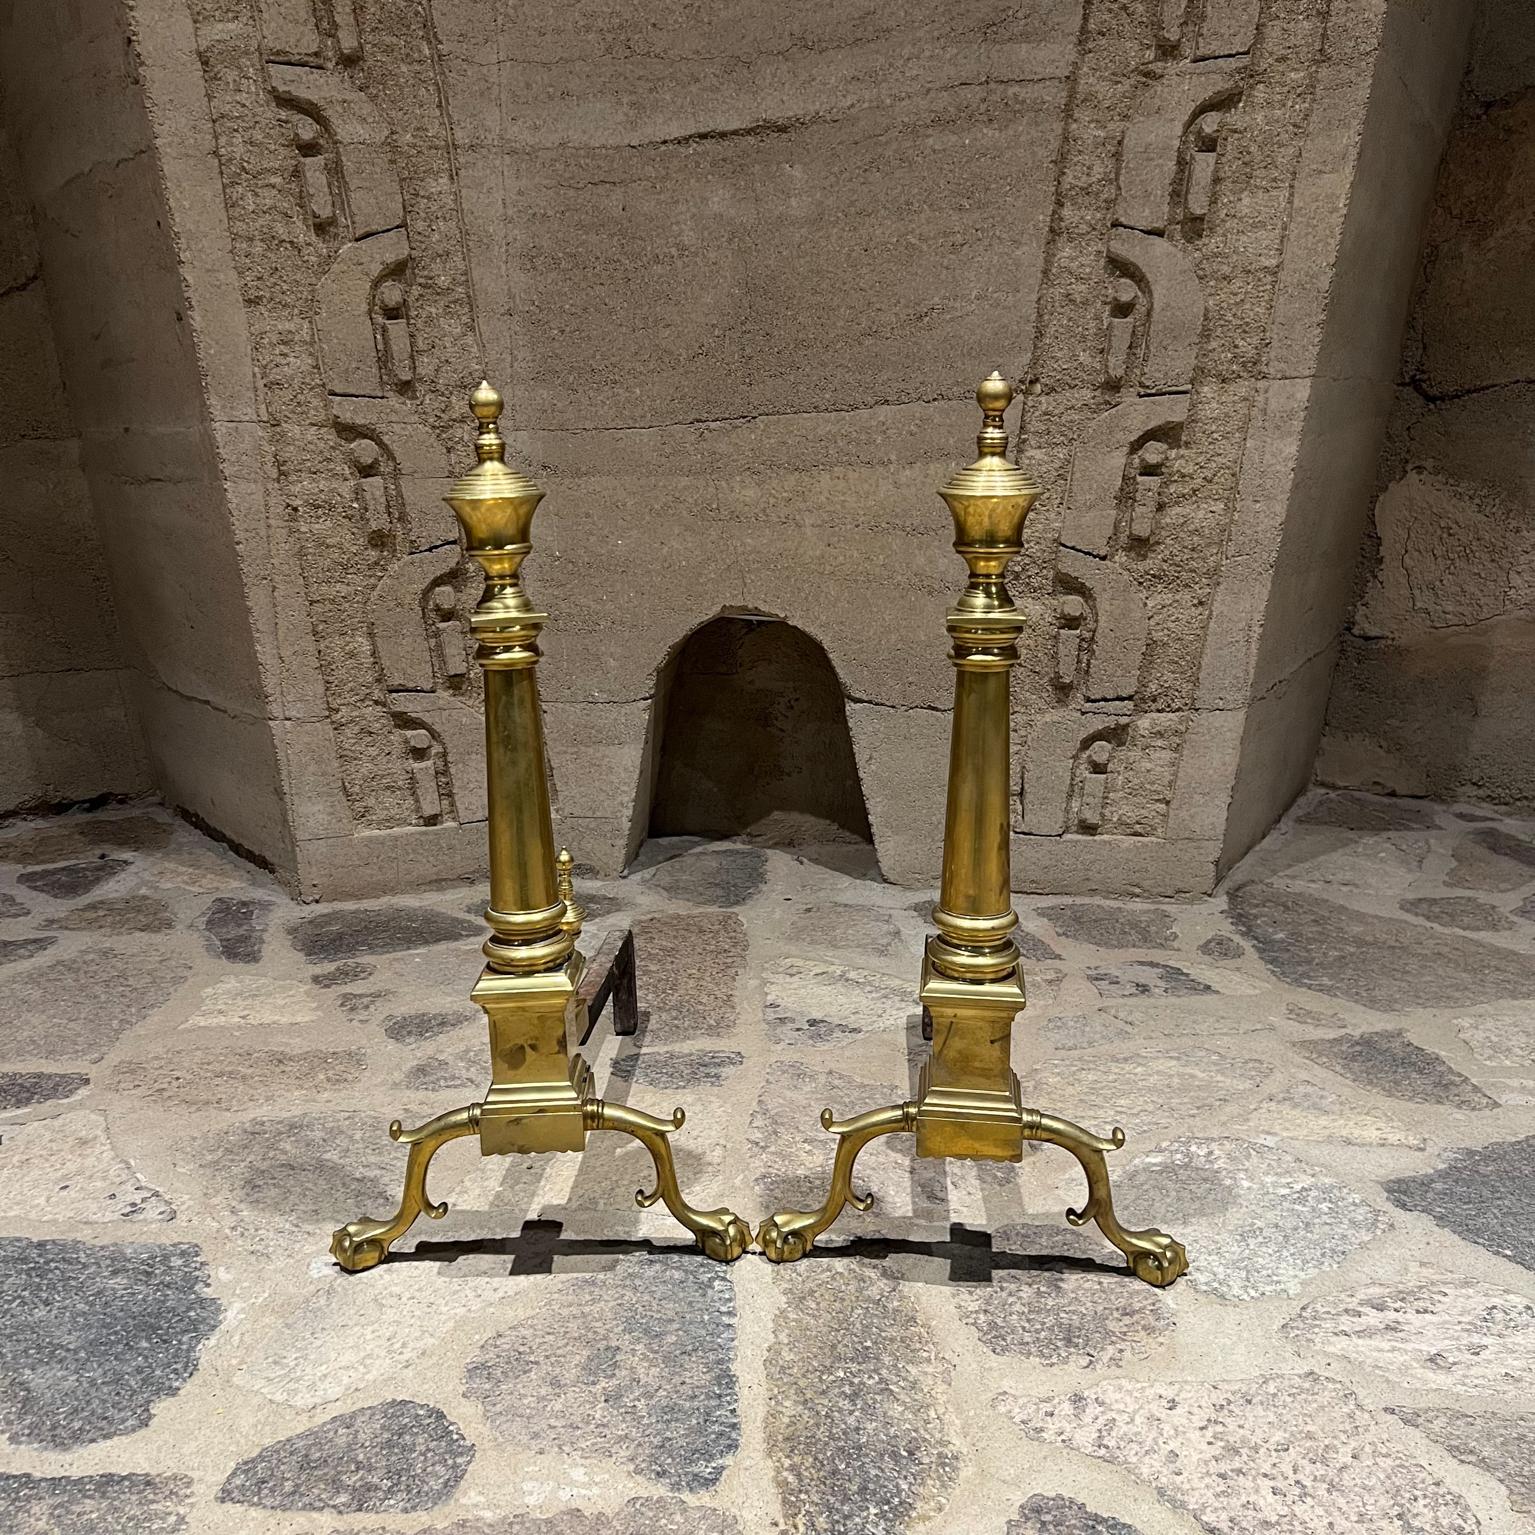 Antique Ornate brass fireplace finial Andirons classical Federal Elegance
Set of brass andirons. Oversize. No label.
Measures: 26.5 tall x 13 width x 19.5 depth
Original preowned unrestored vintage condition
See images provided please.




